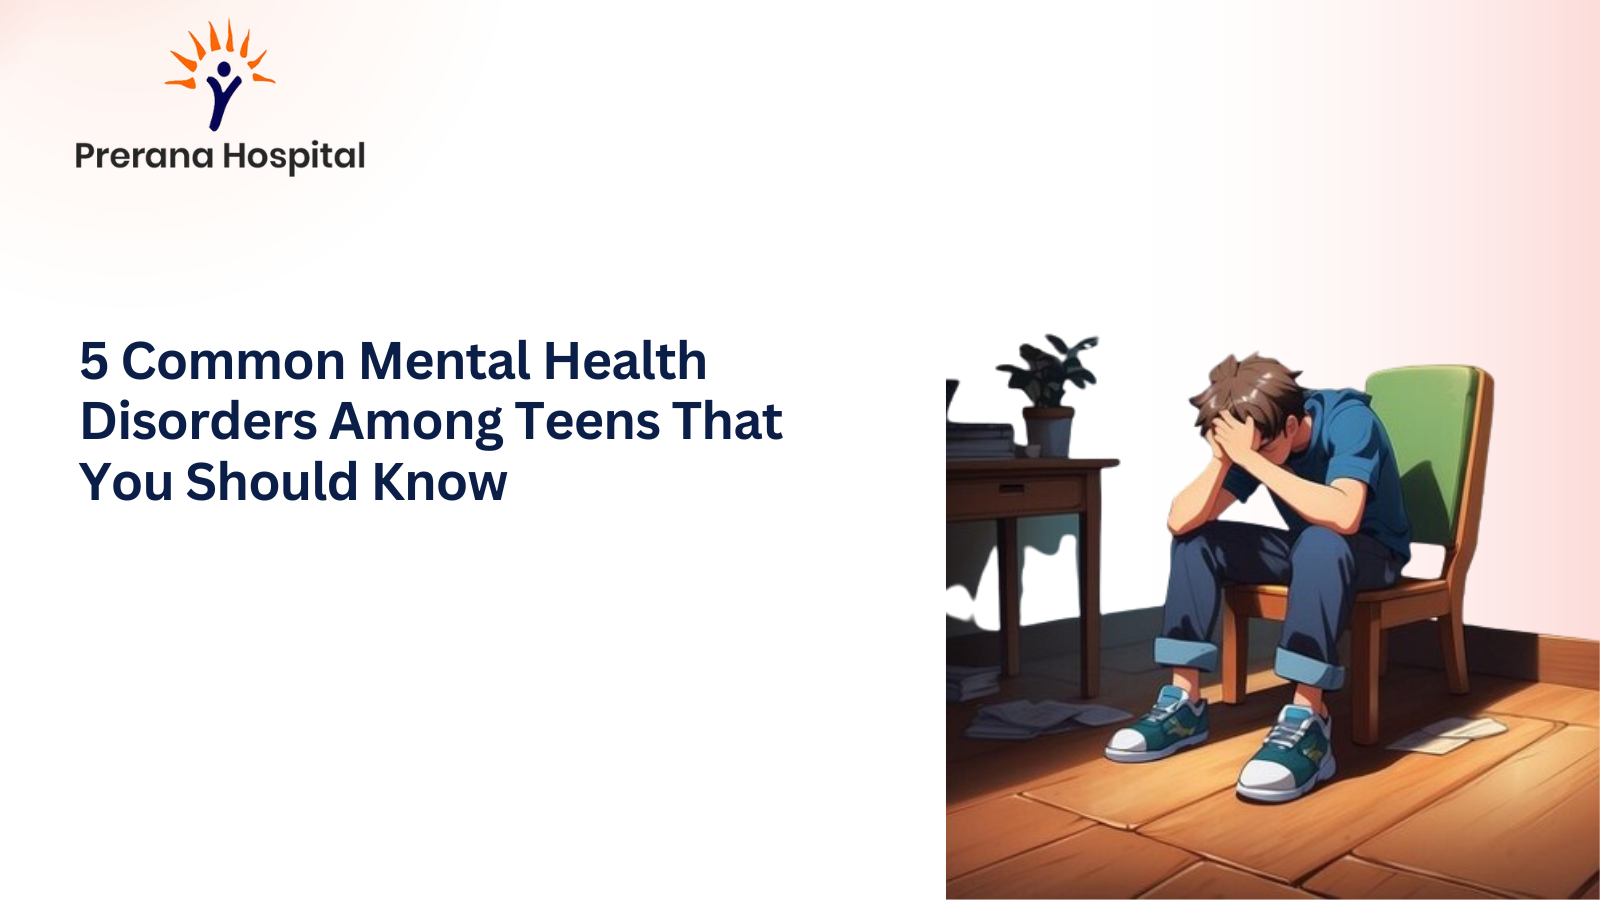 5 Common Mental Health Disorders Among Teens That You Should Know